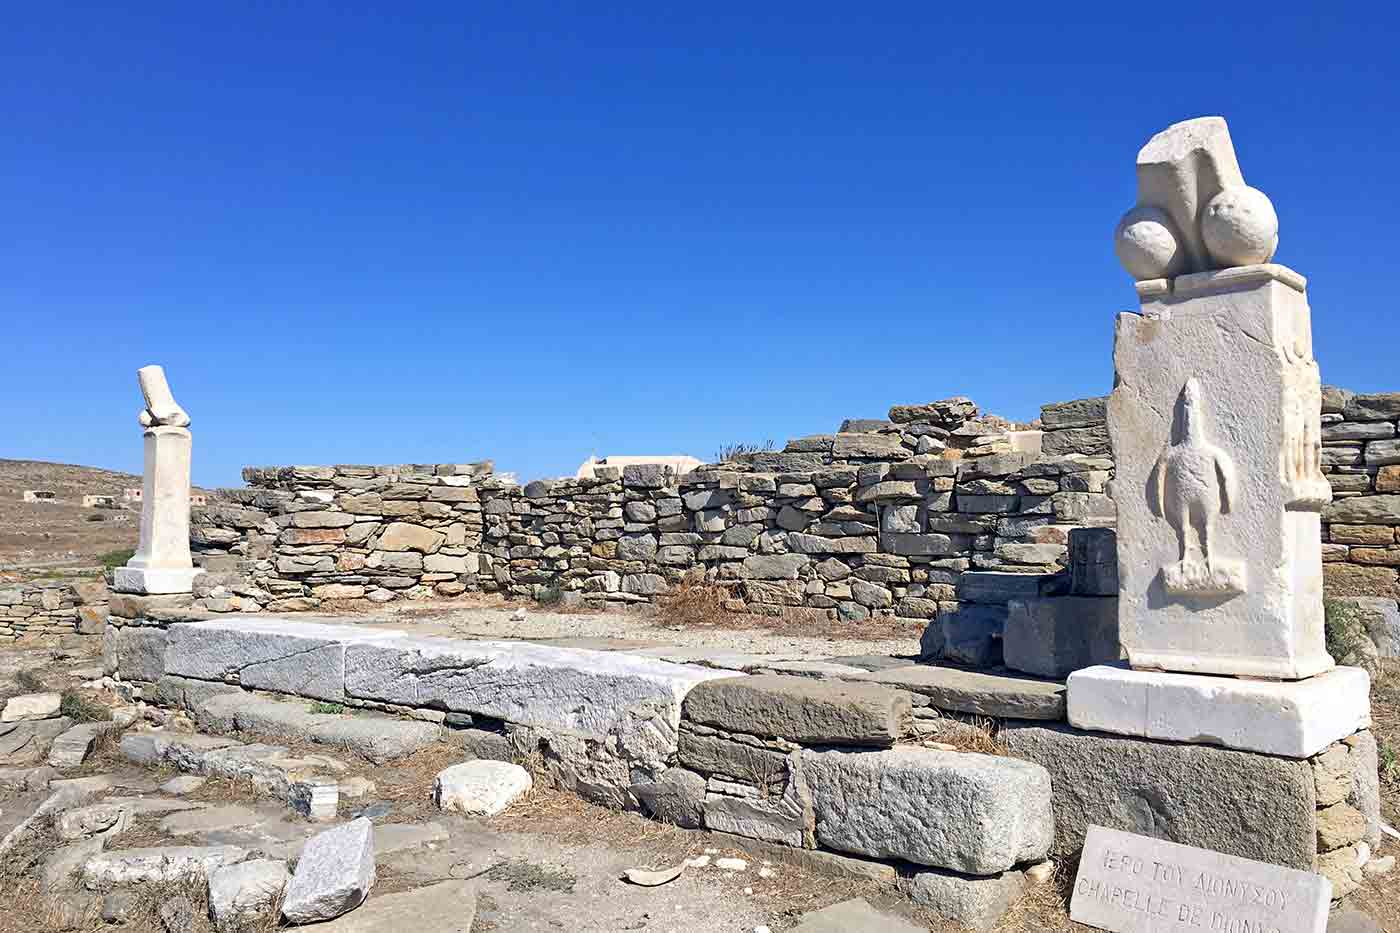 Archaeological Site of Delos